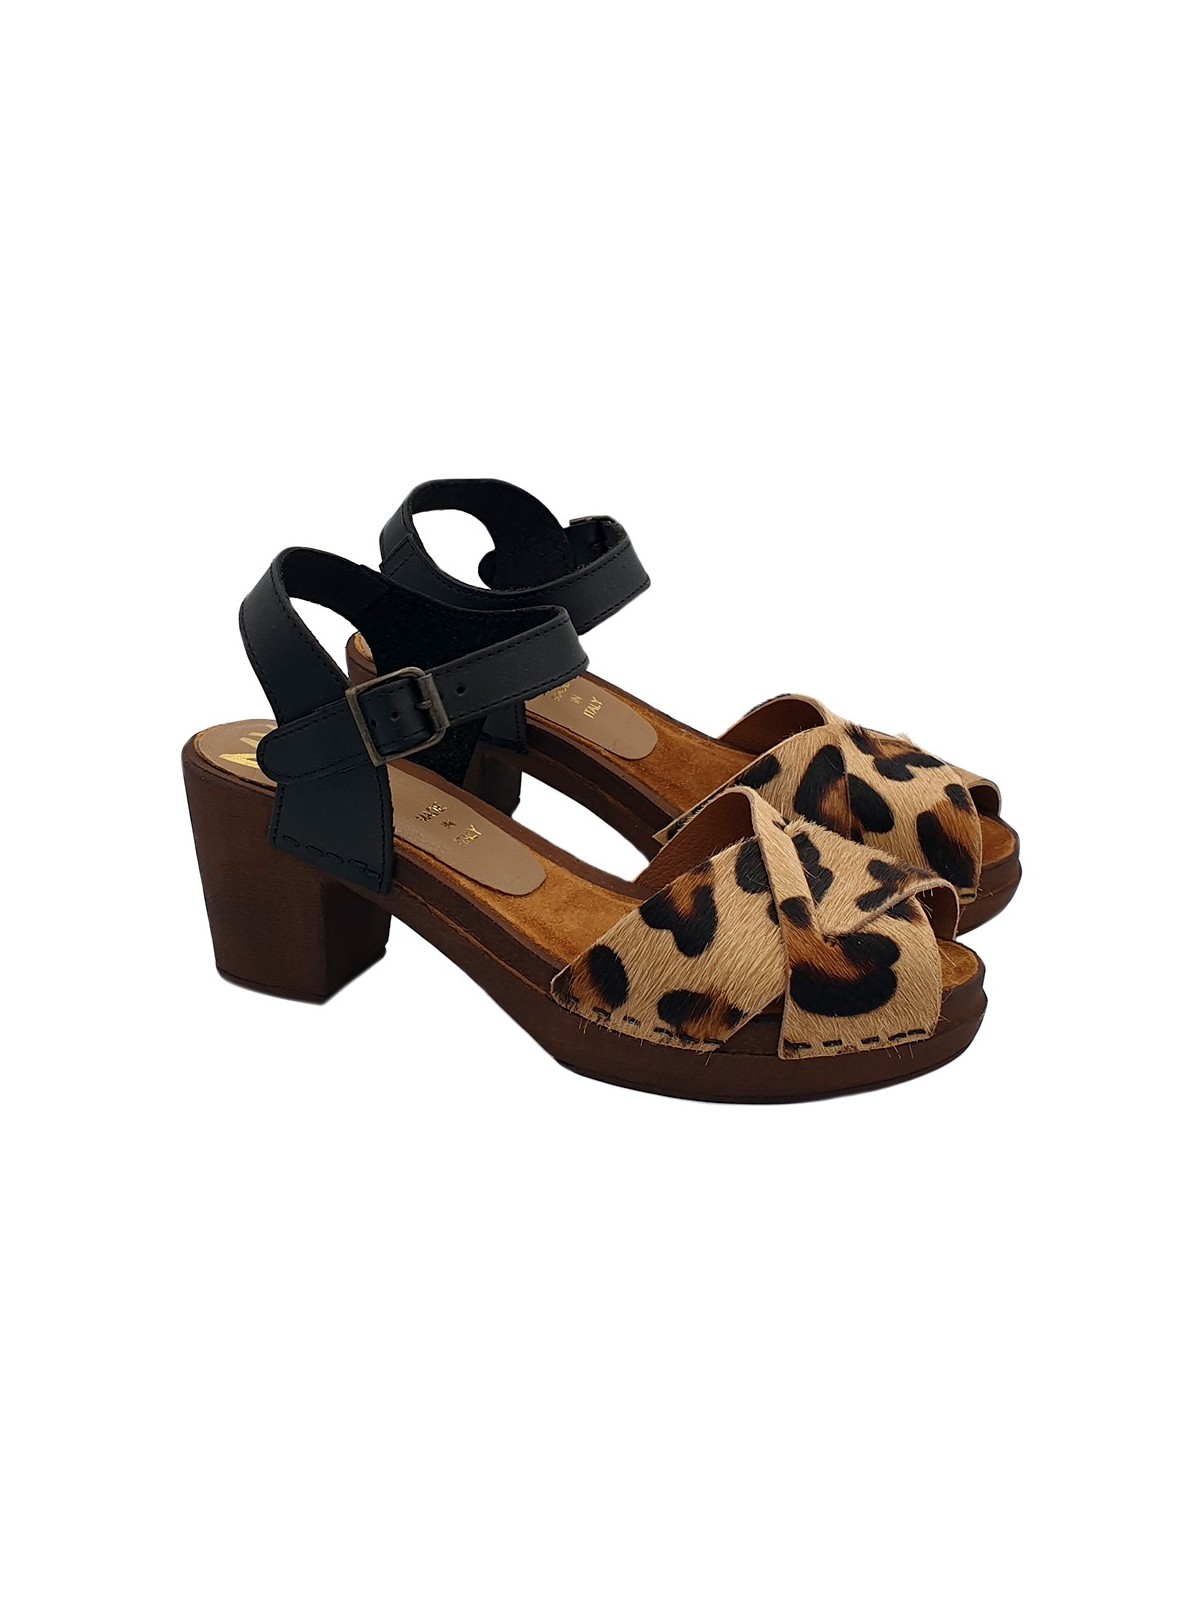 CLOGS ANIMALIER IN LEATHER HEEL 7